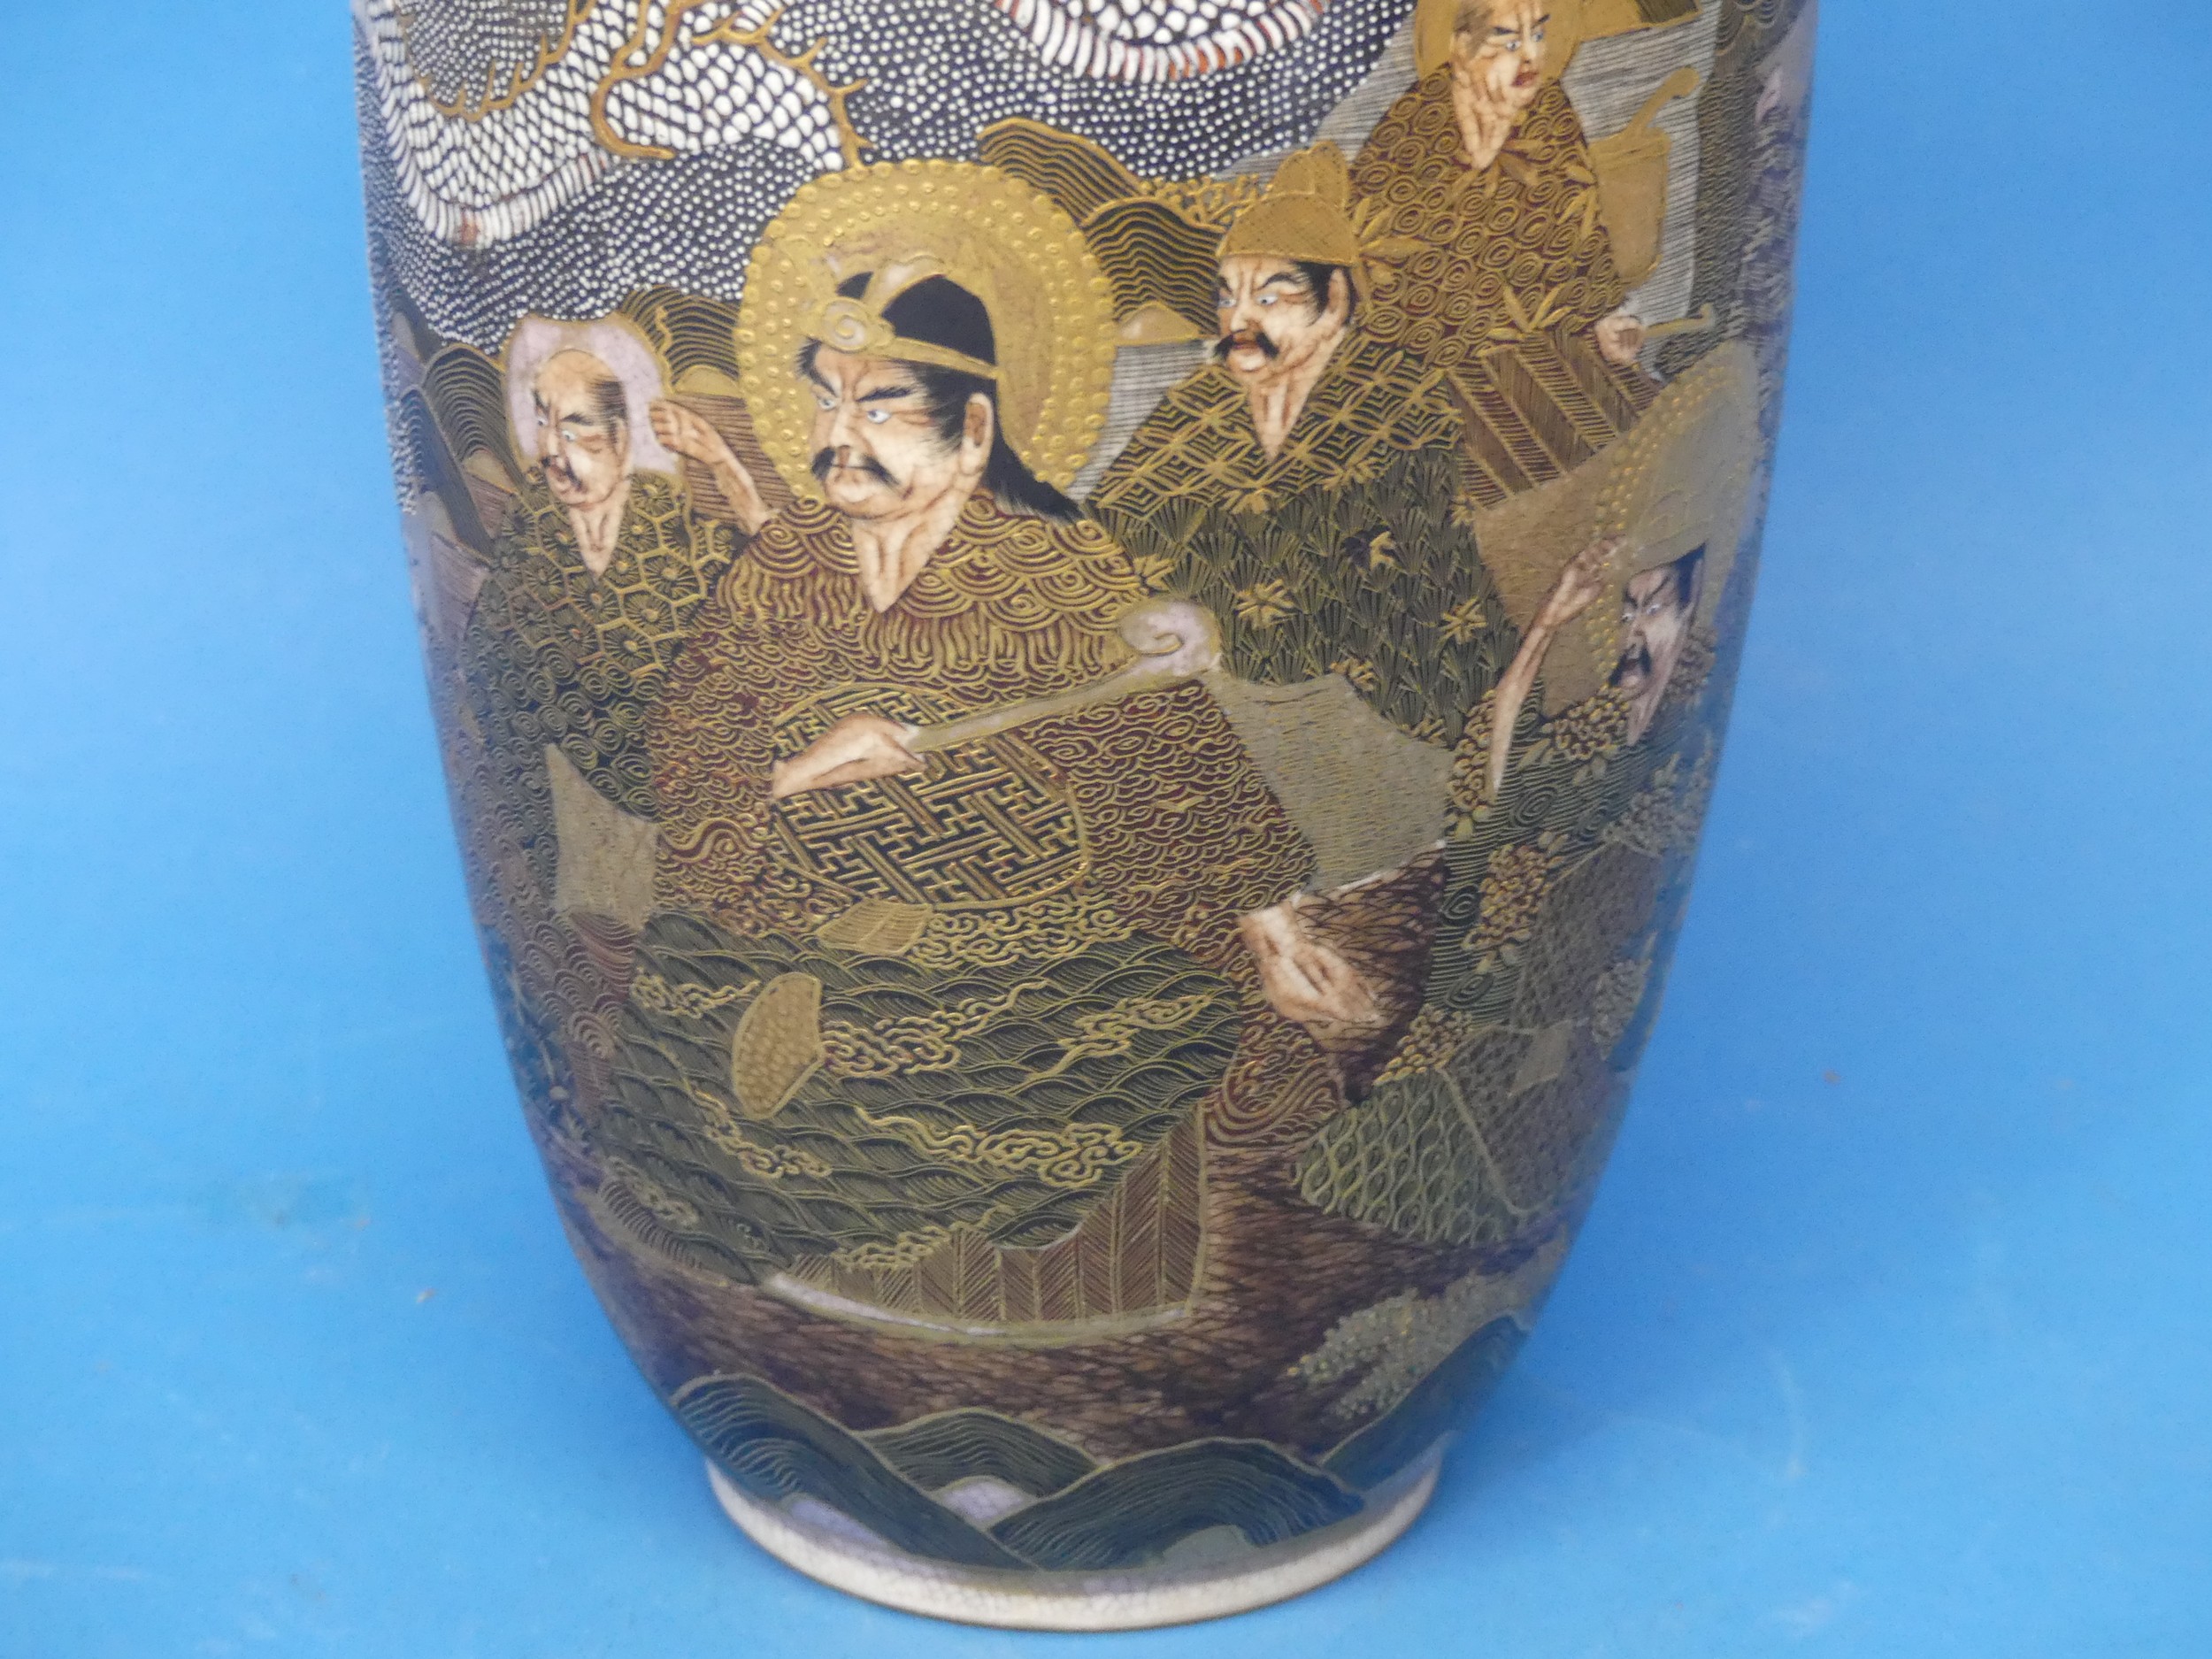 An early 20thC Japanese Satsuma Vase, depicting characters' faces, dragons and temples, with a - Image 5 of 8